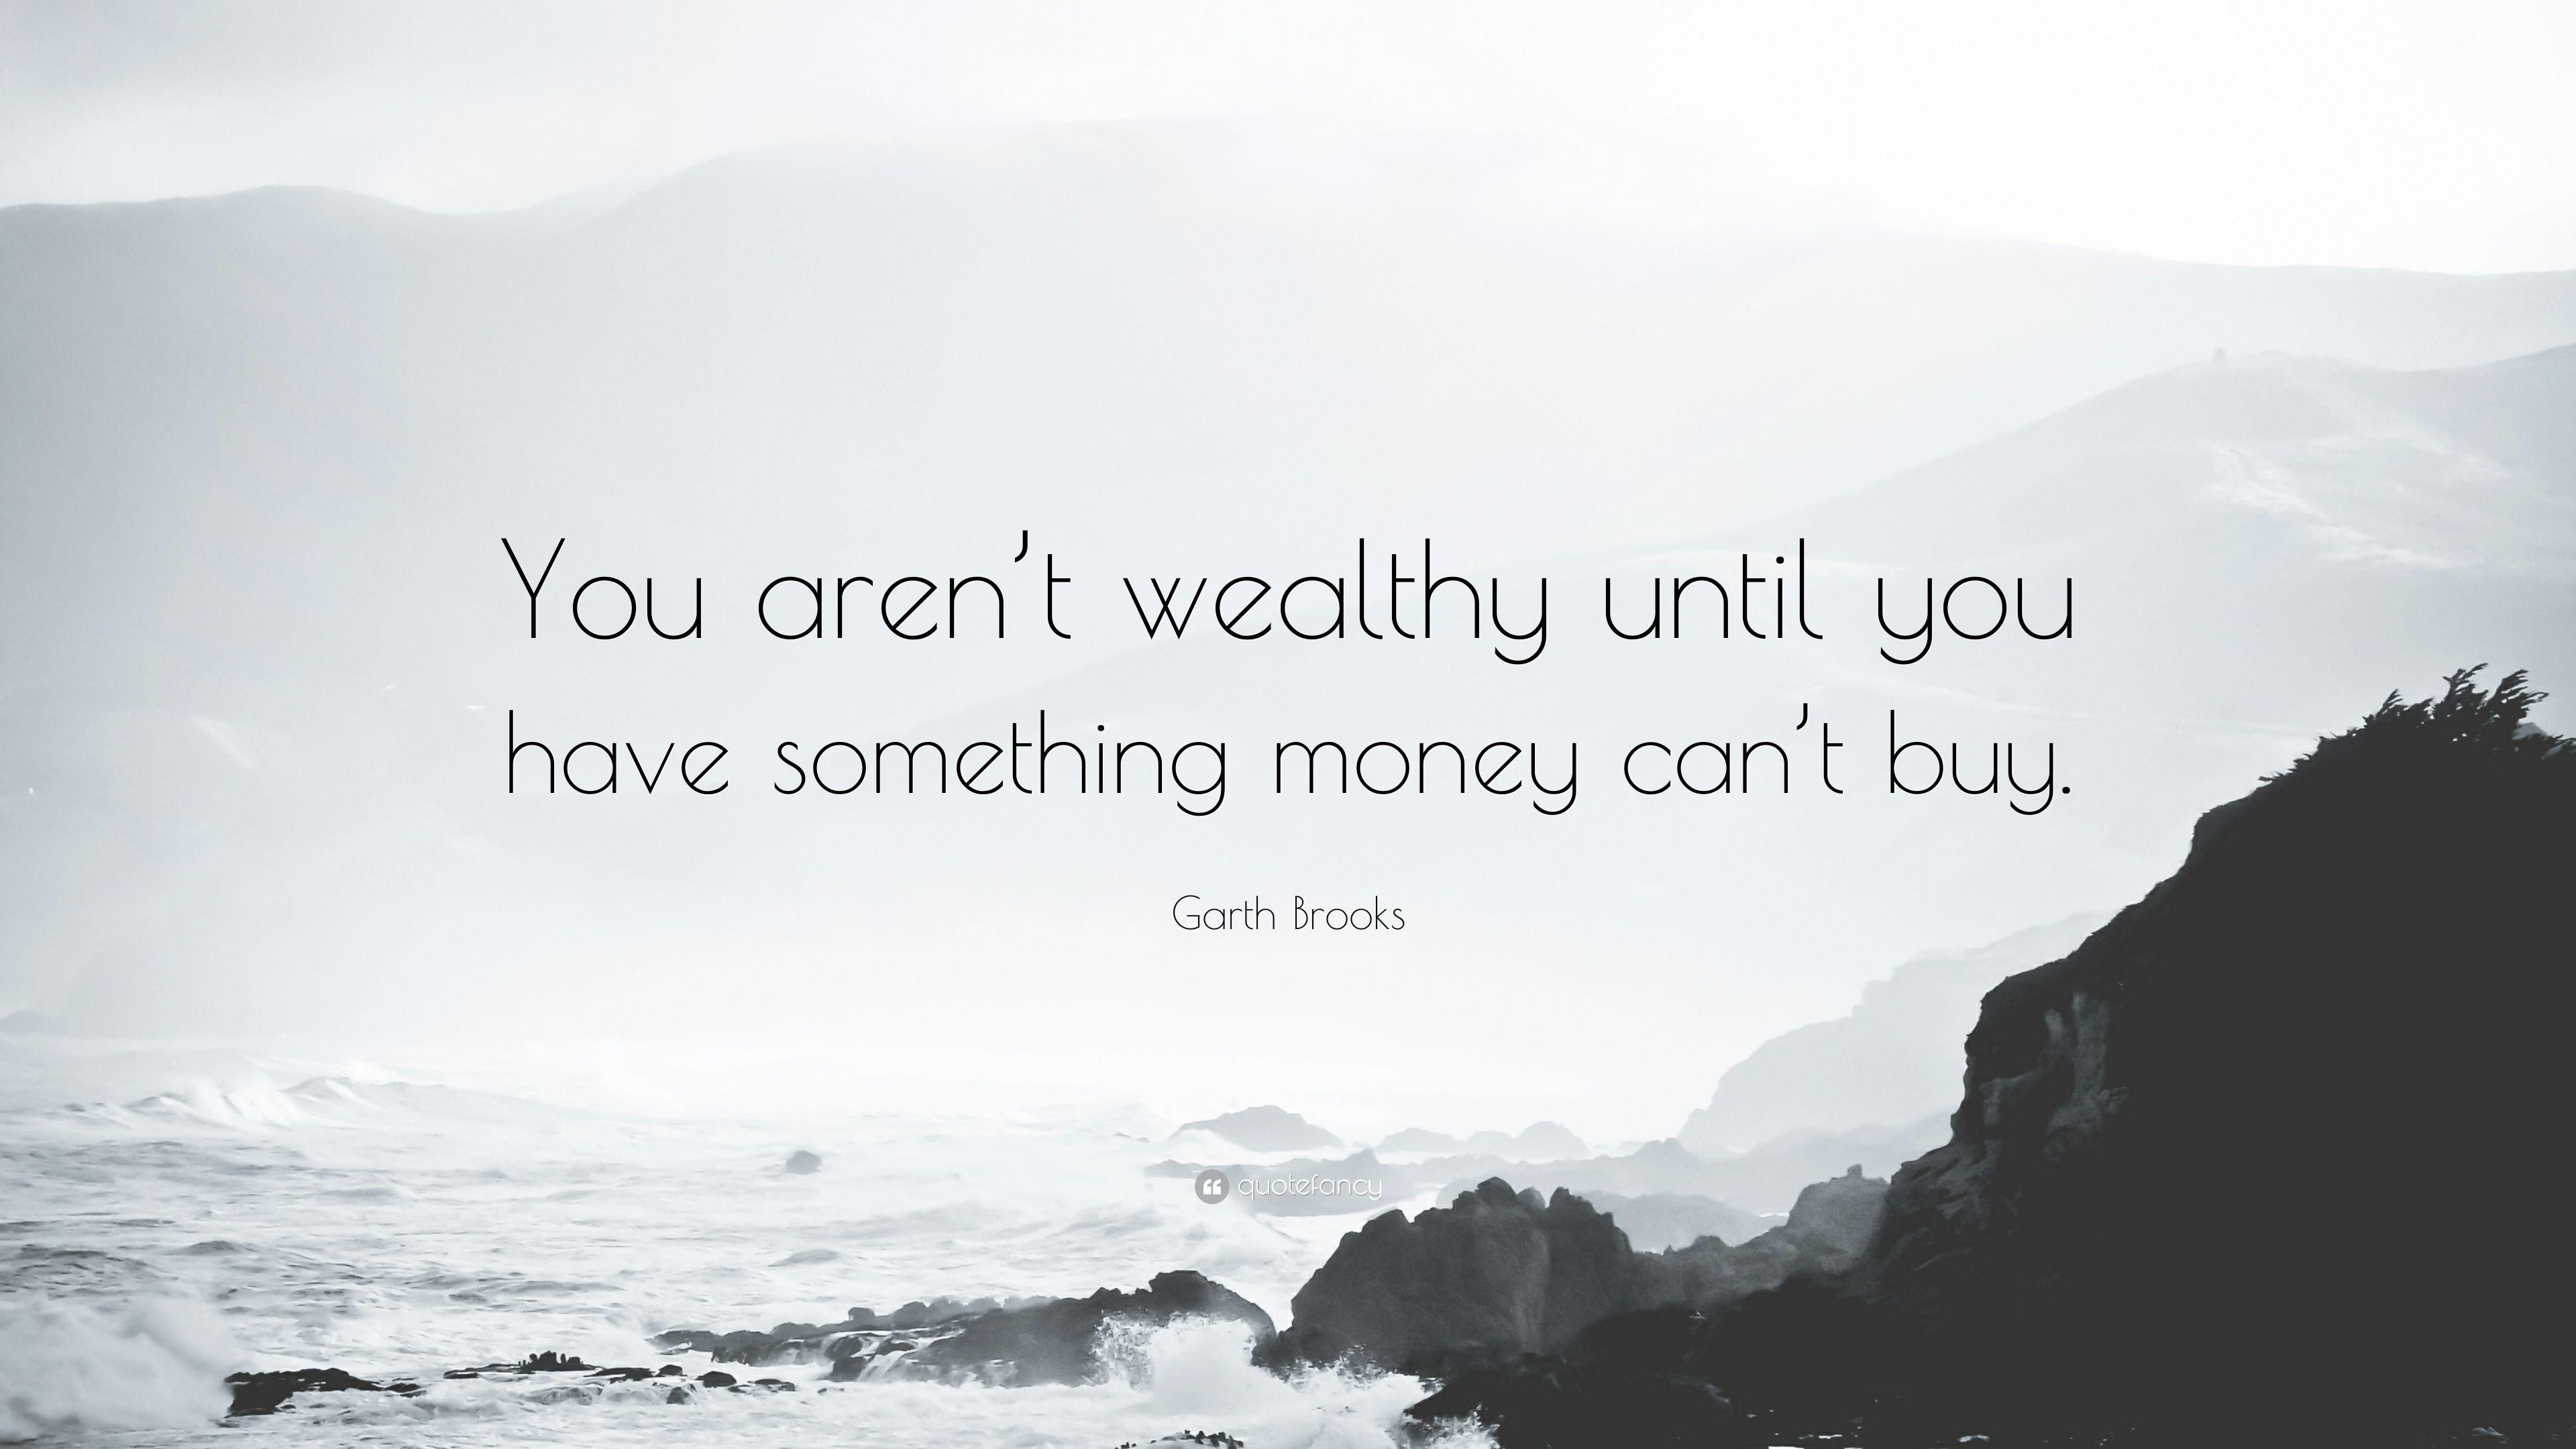 Garth Brooks Quote: “You aren't wealthy until you have something